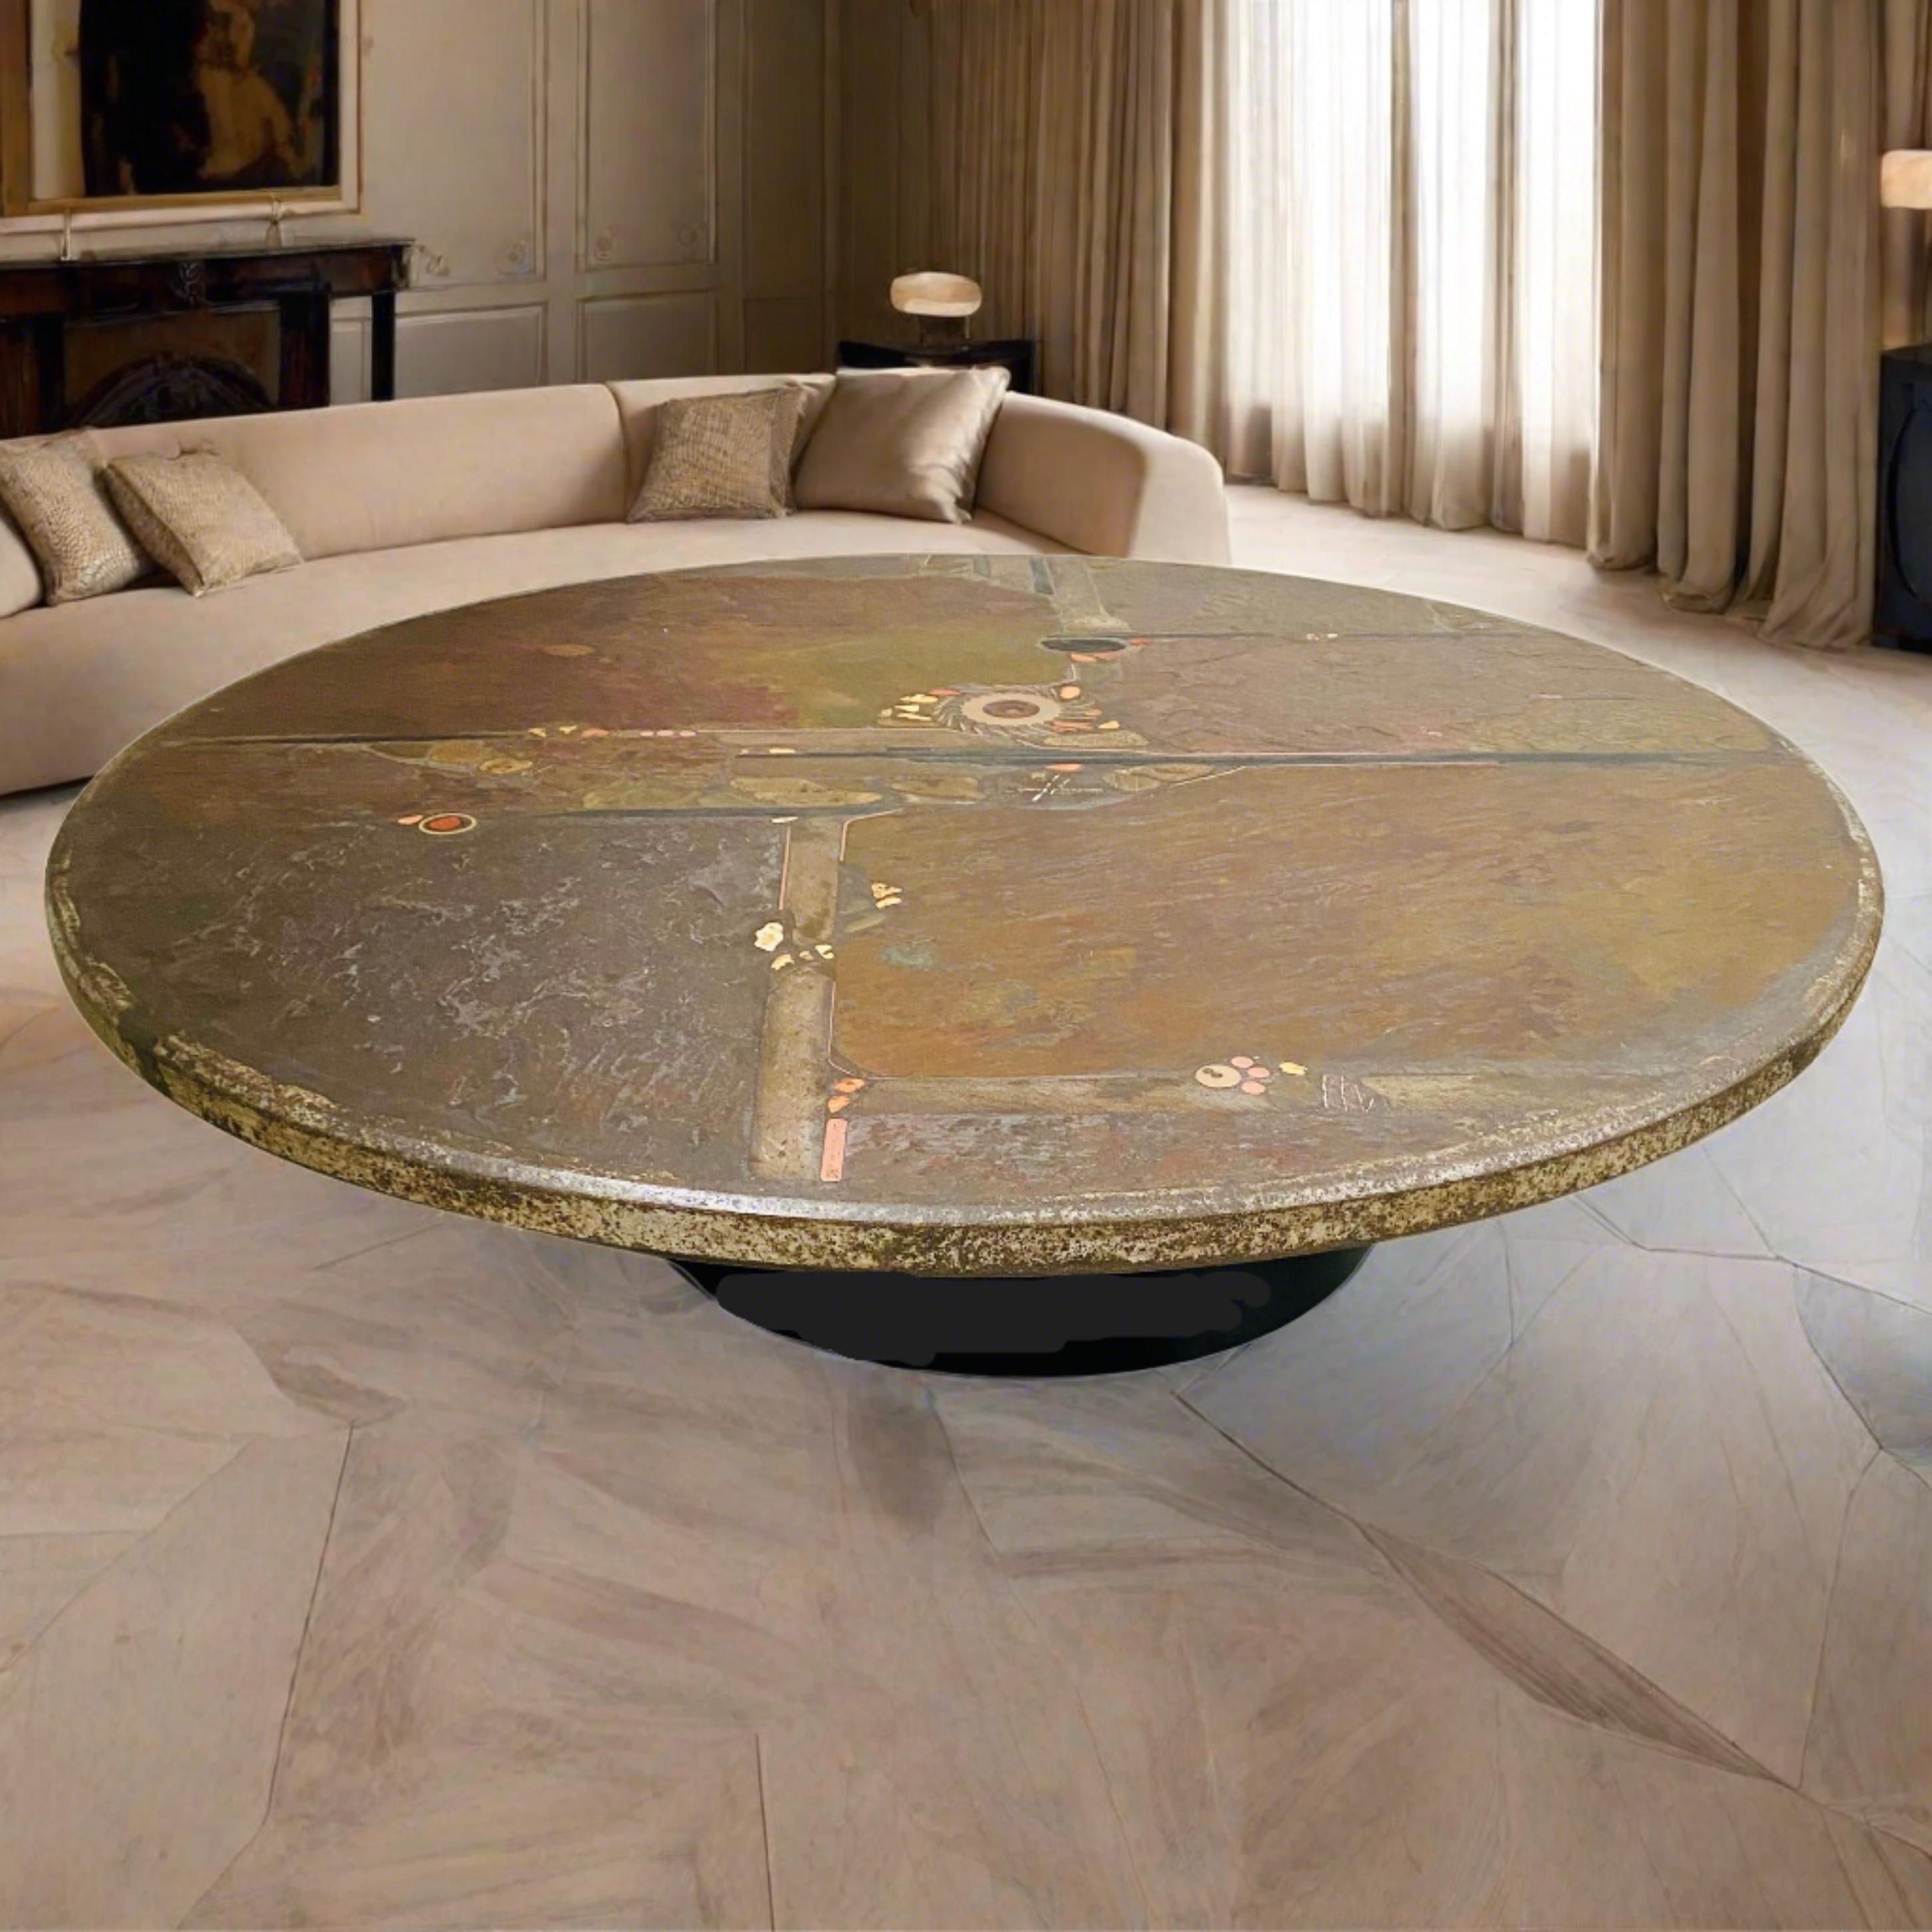 Inlay Brutalist Art Stone Round Coffee Table by Sculptor Paul Kingma Netherlands, 1985 For Sale